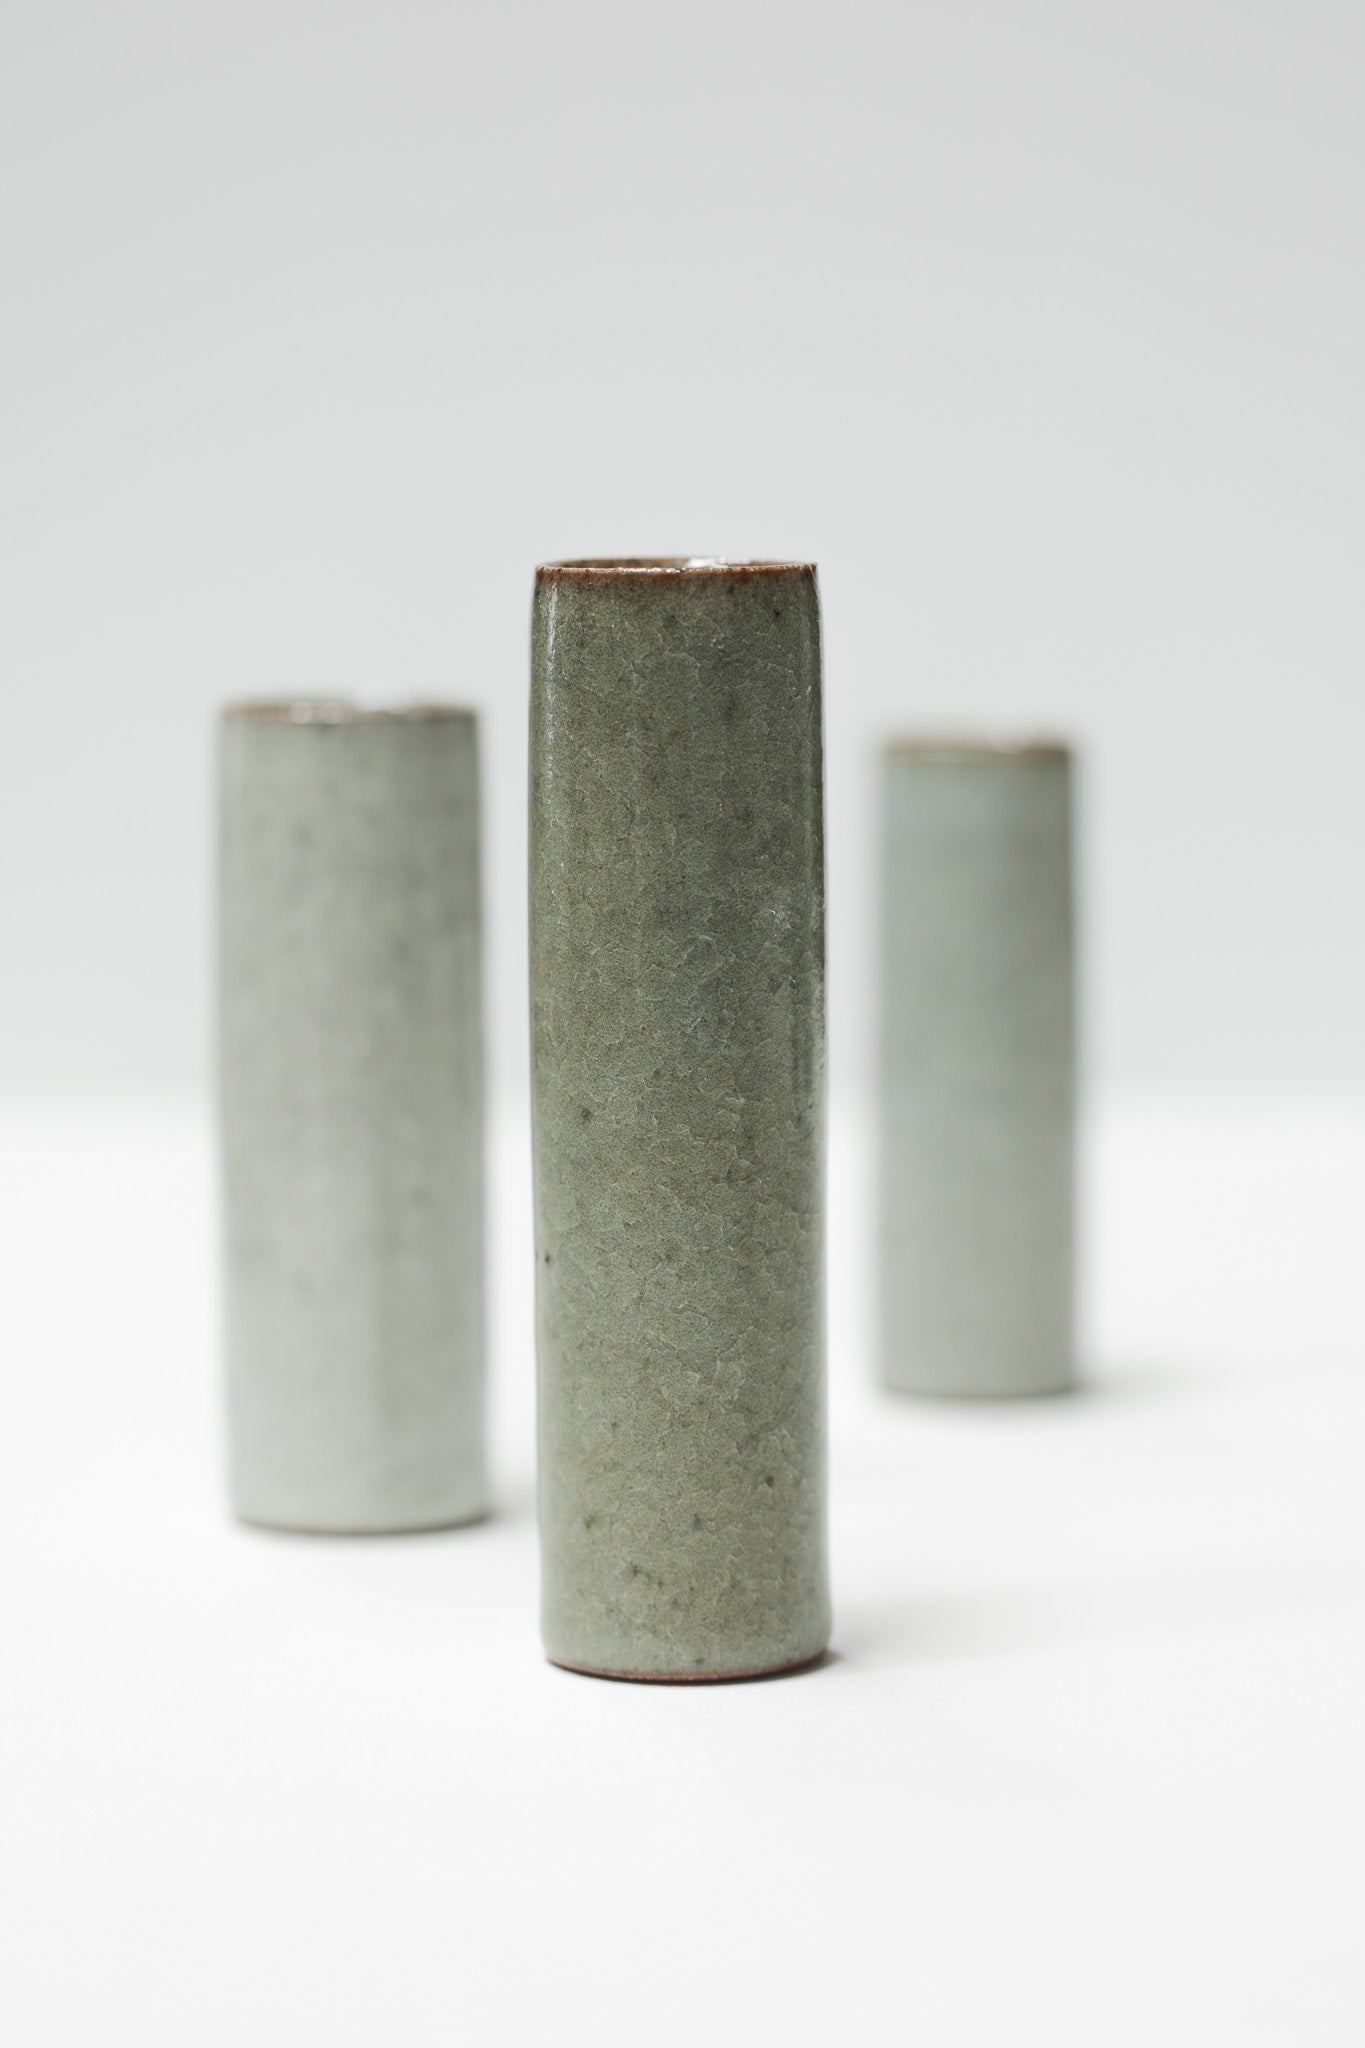 Florian Gadsby: Trio of Small Cylindrical Vases